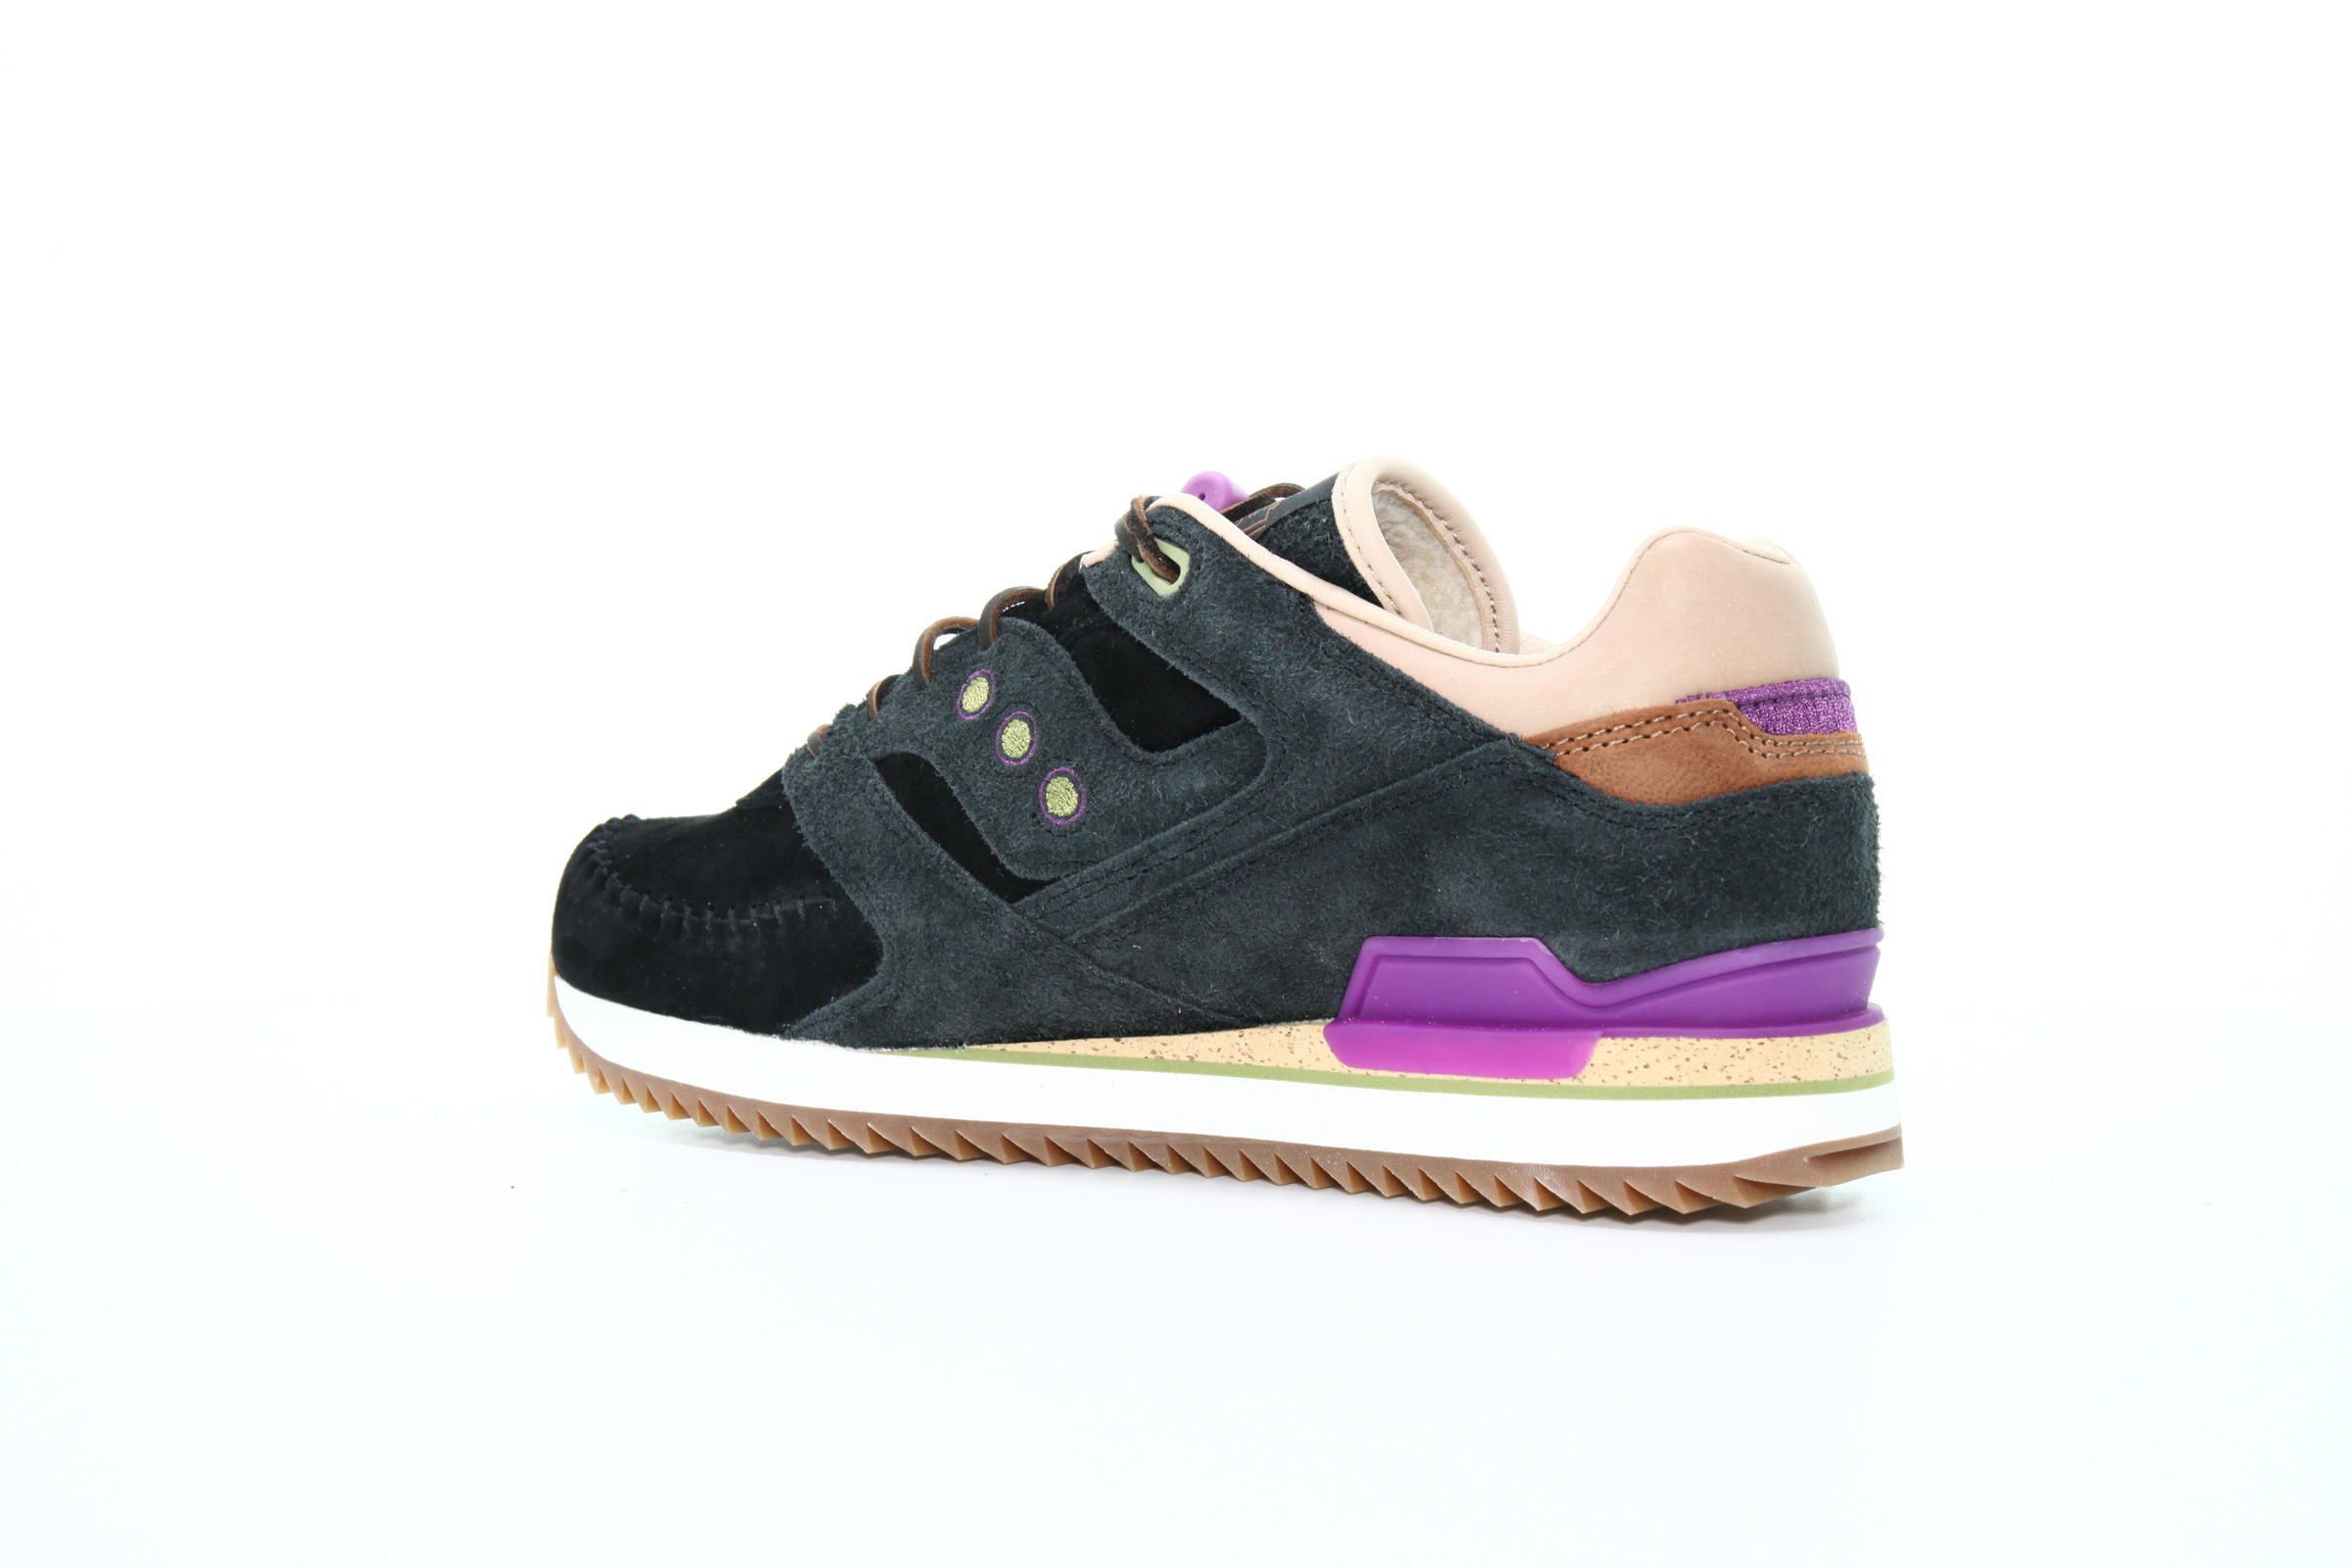 Saucony x LAPSTONE & HAMMER COURAGEOUS MOC "TWO RIVERS"